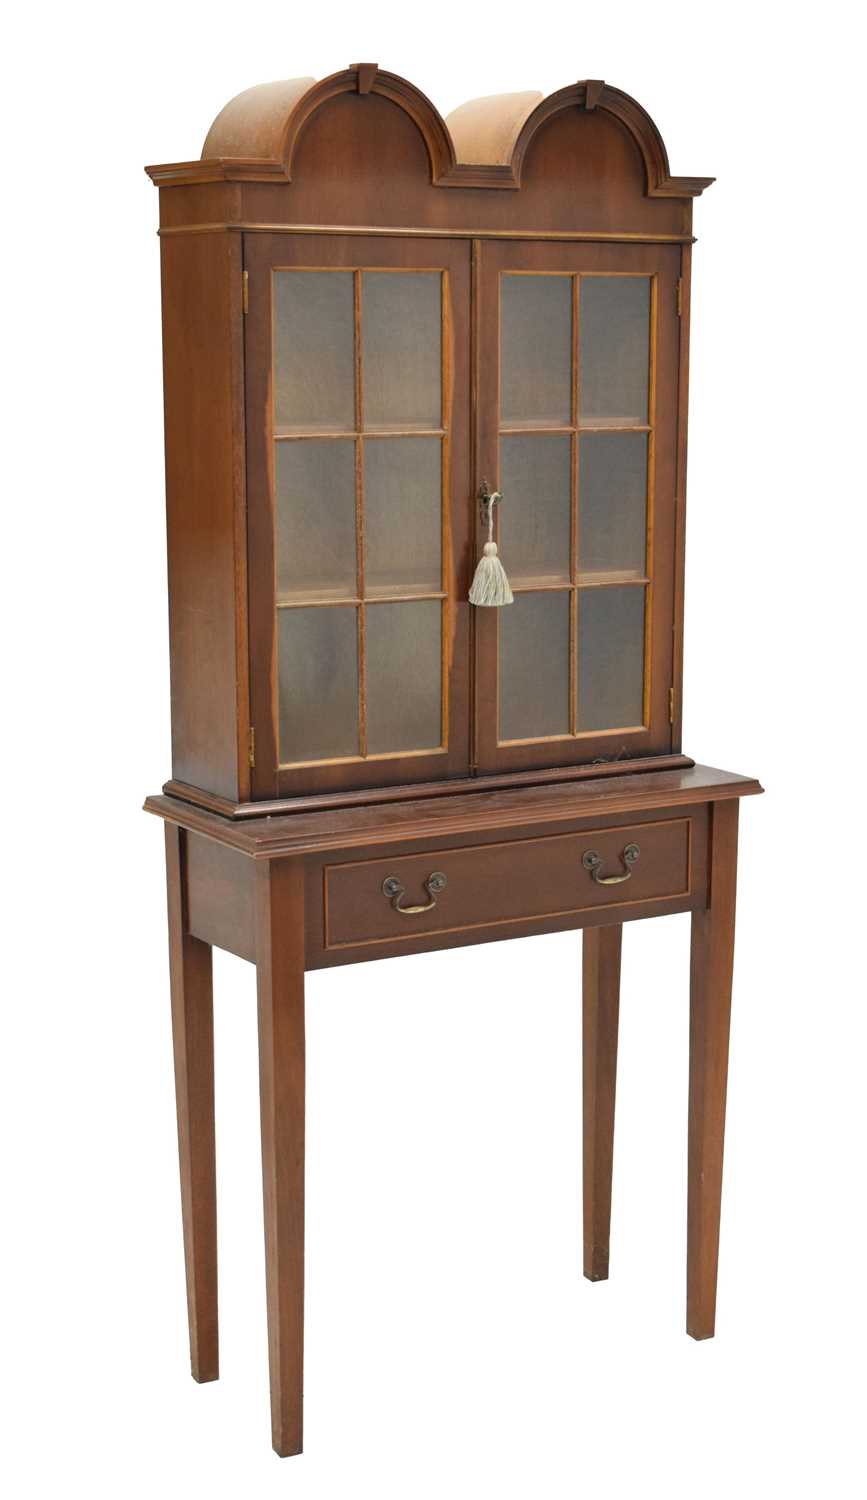 Reproduction mahogany double-domed cabinet on stand